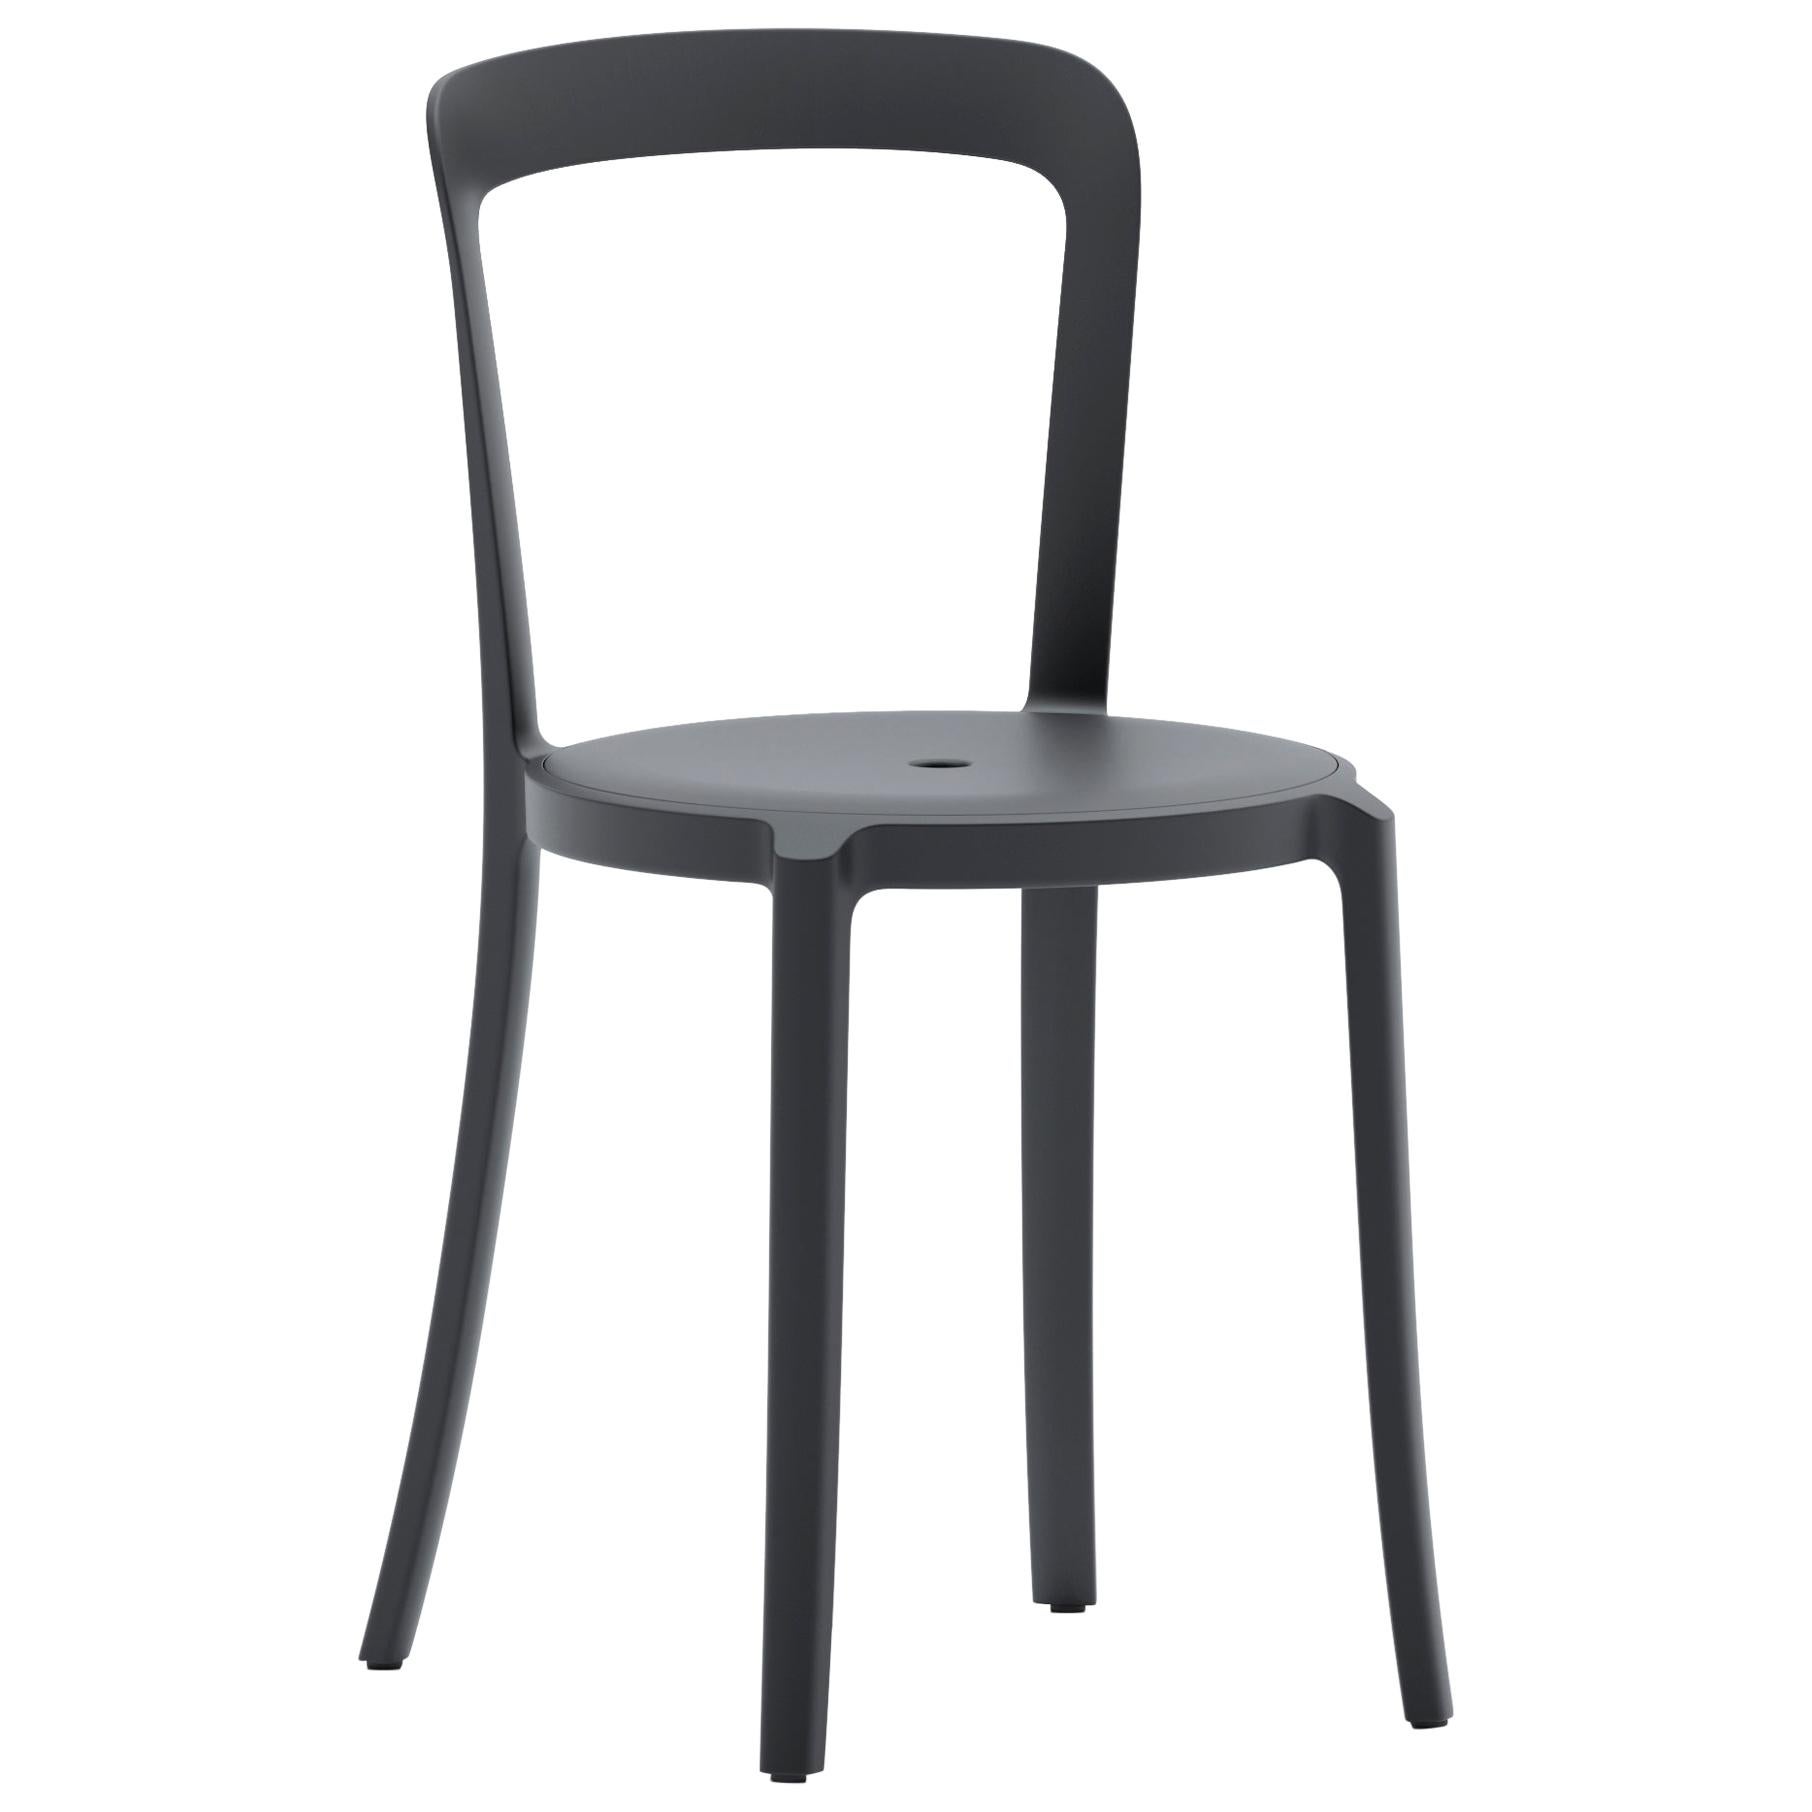 Emeco On & On Stacking Chair in Black Plastic by Barber & Osgerby For Sale